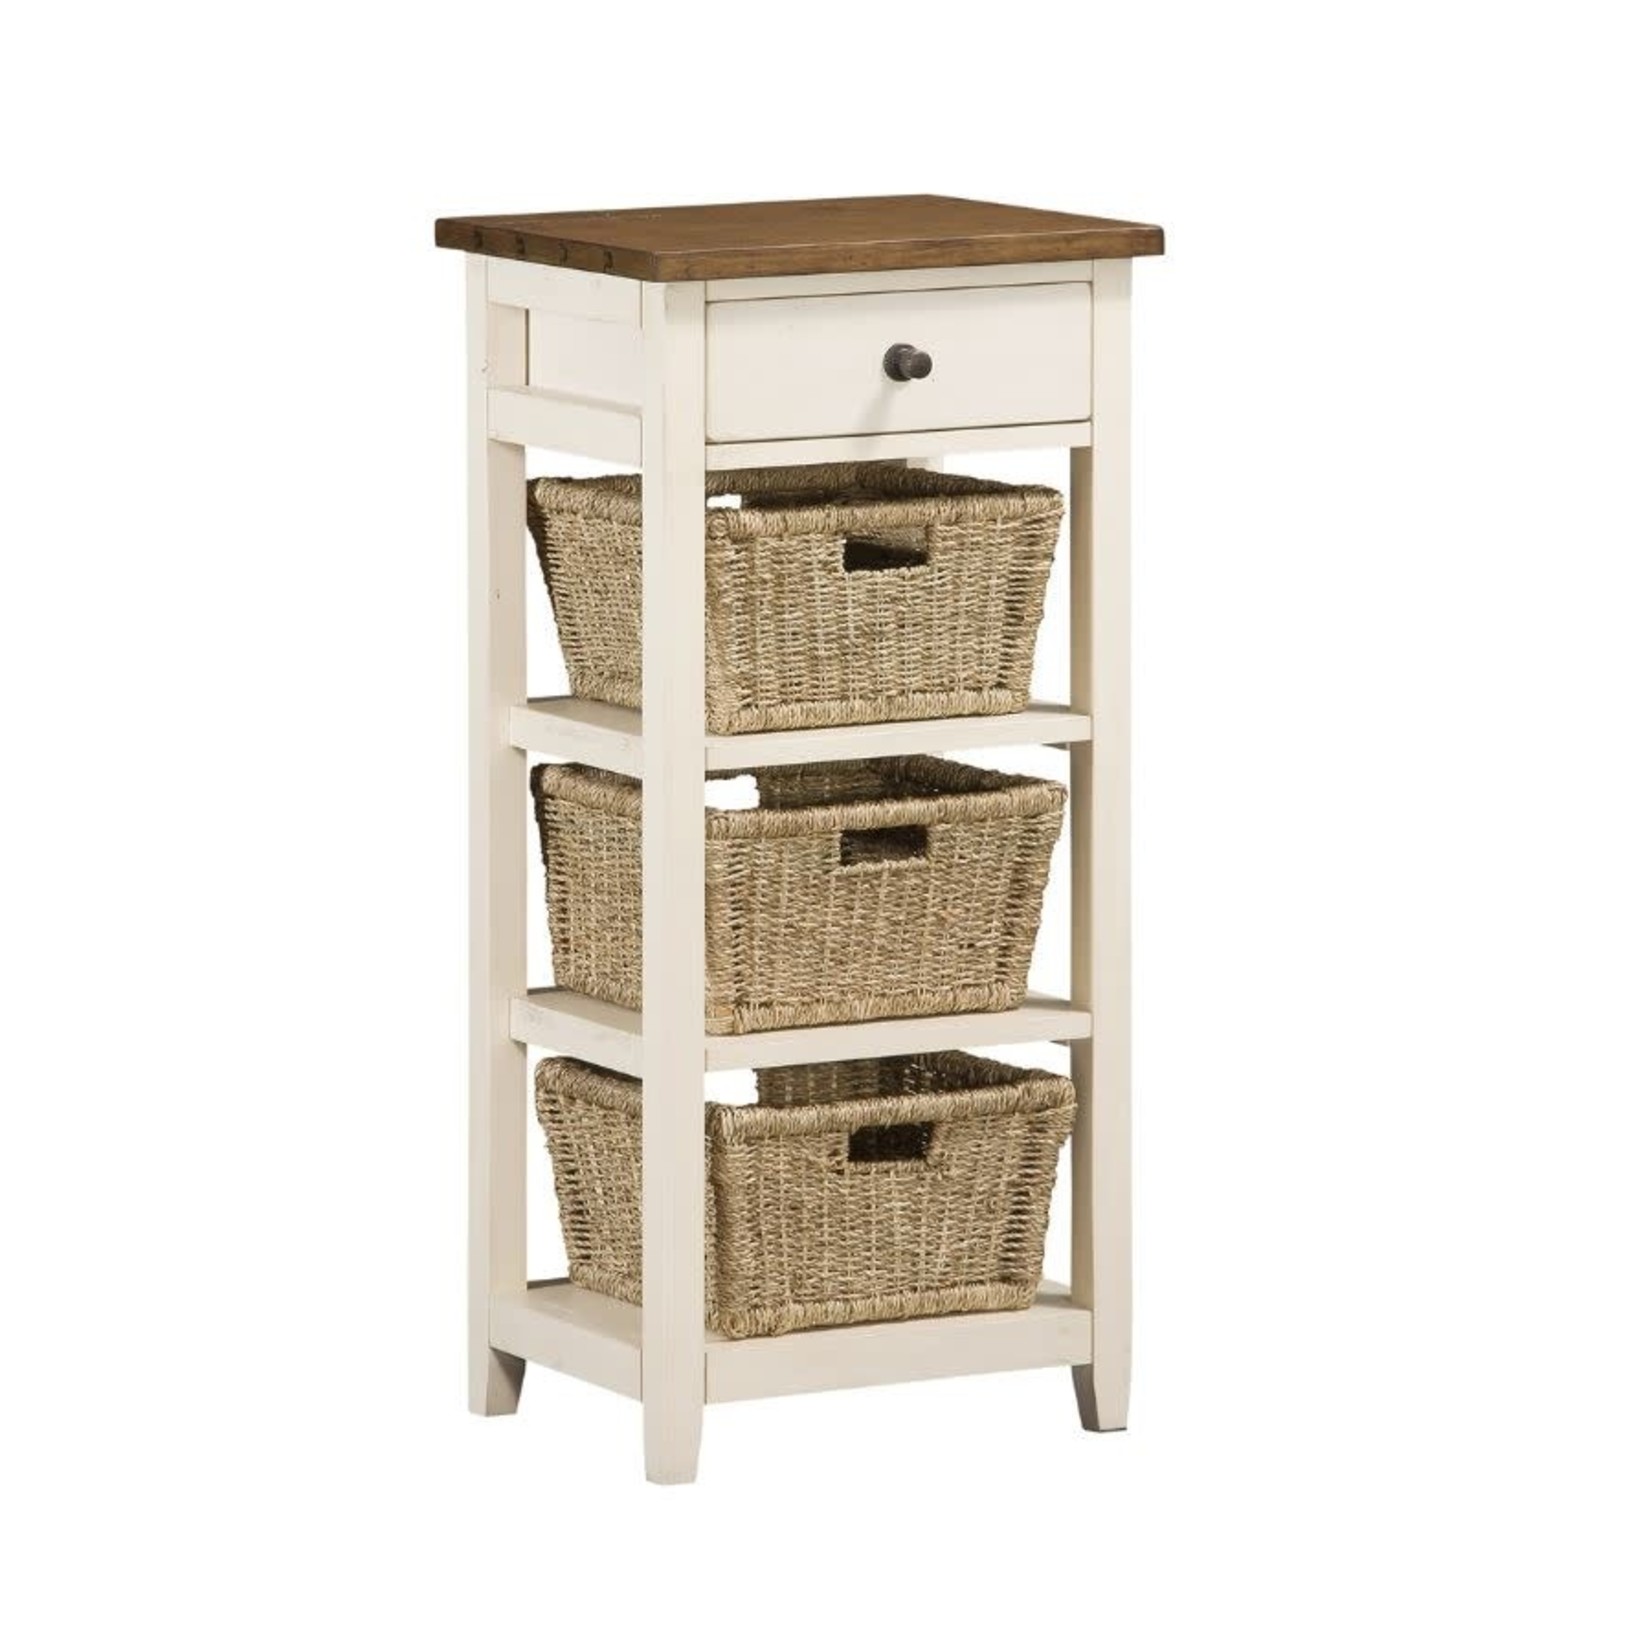 Hillsdale Tuscan Retreat 3 Basket Stand Country White